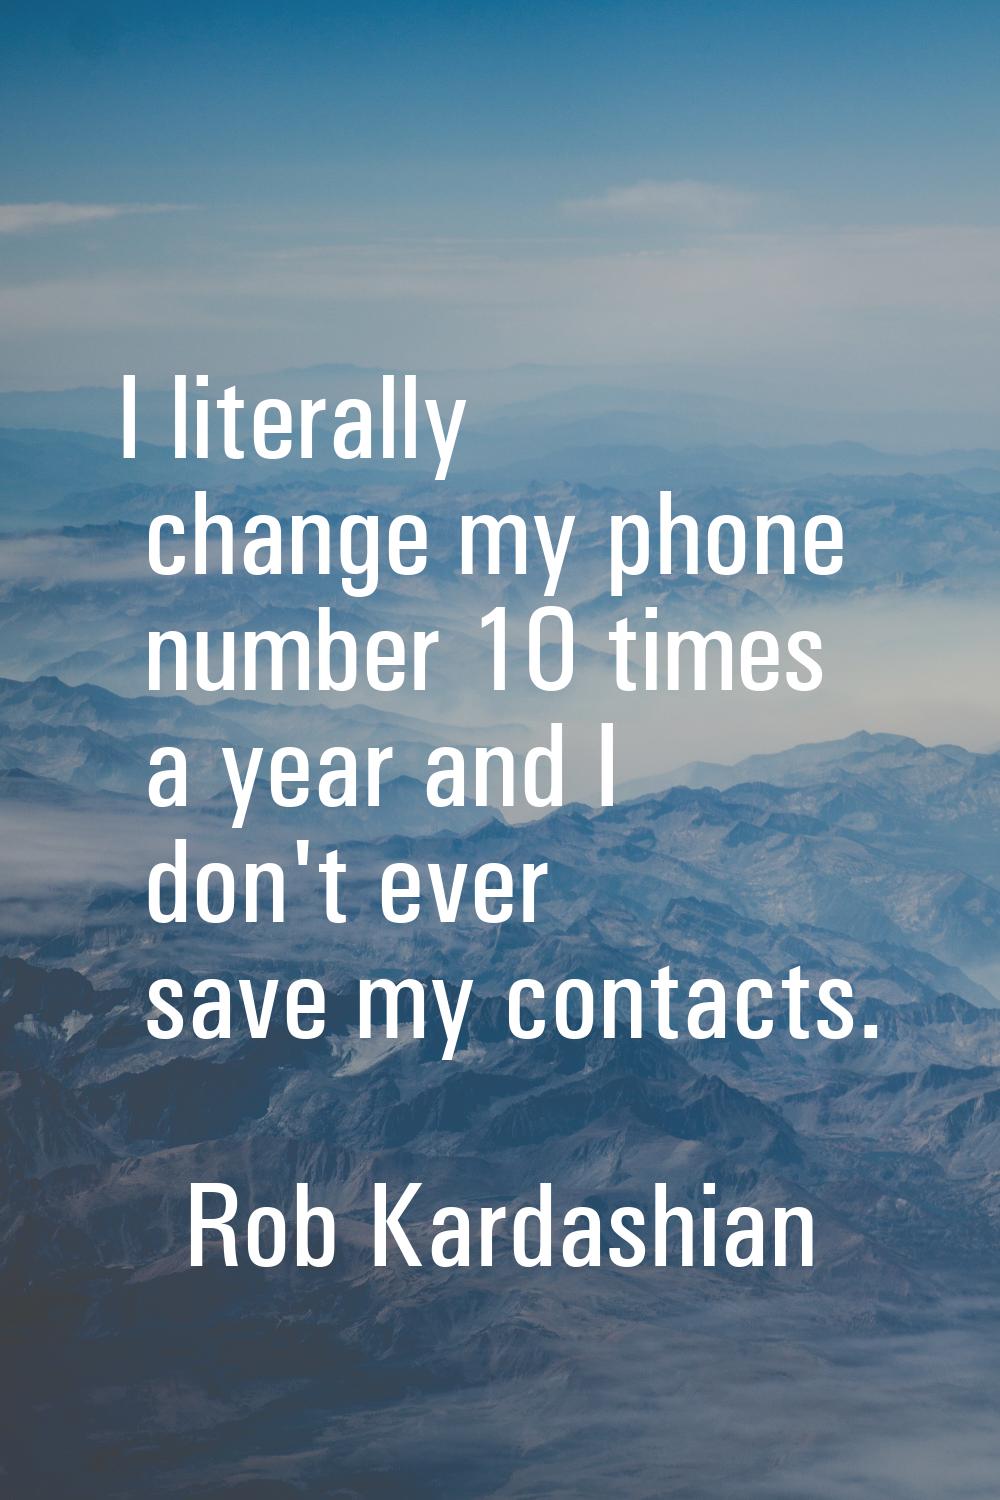 I literally change my phone number 10 times a year and I don't ever save my contacts.